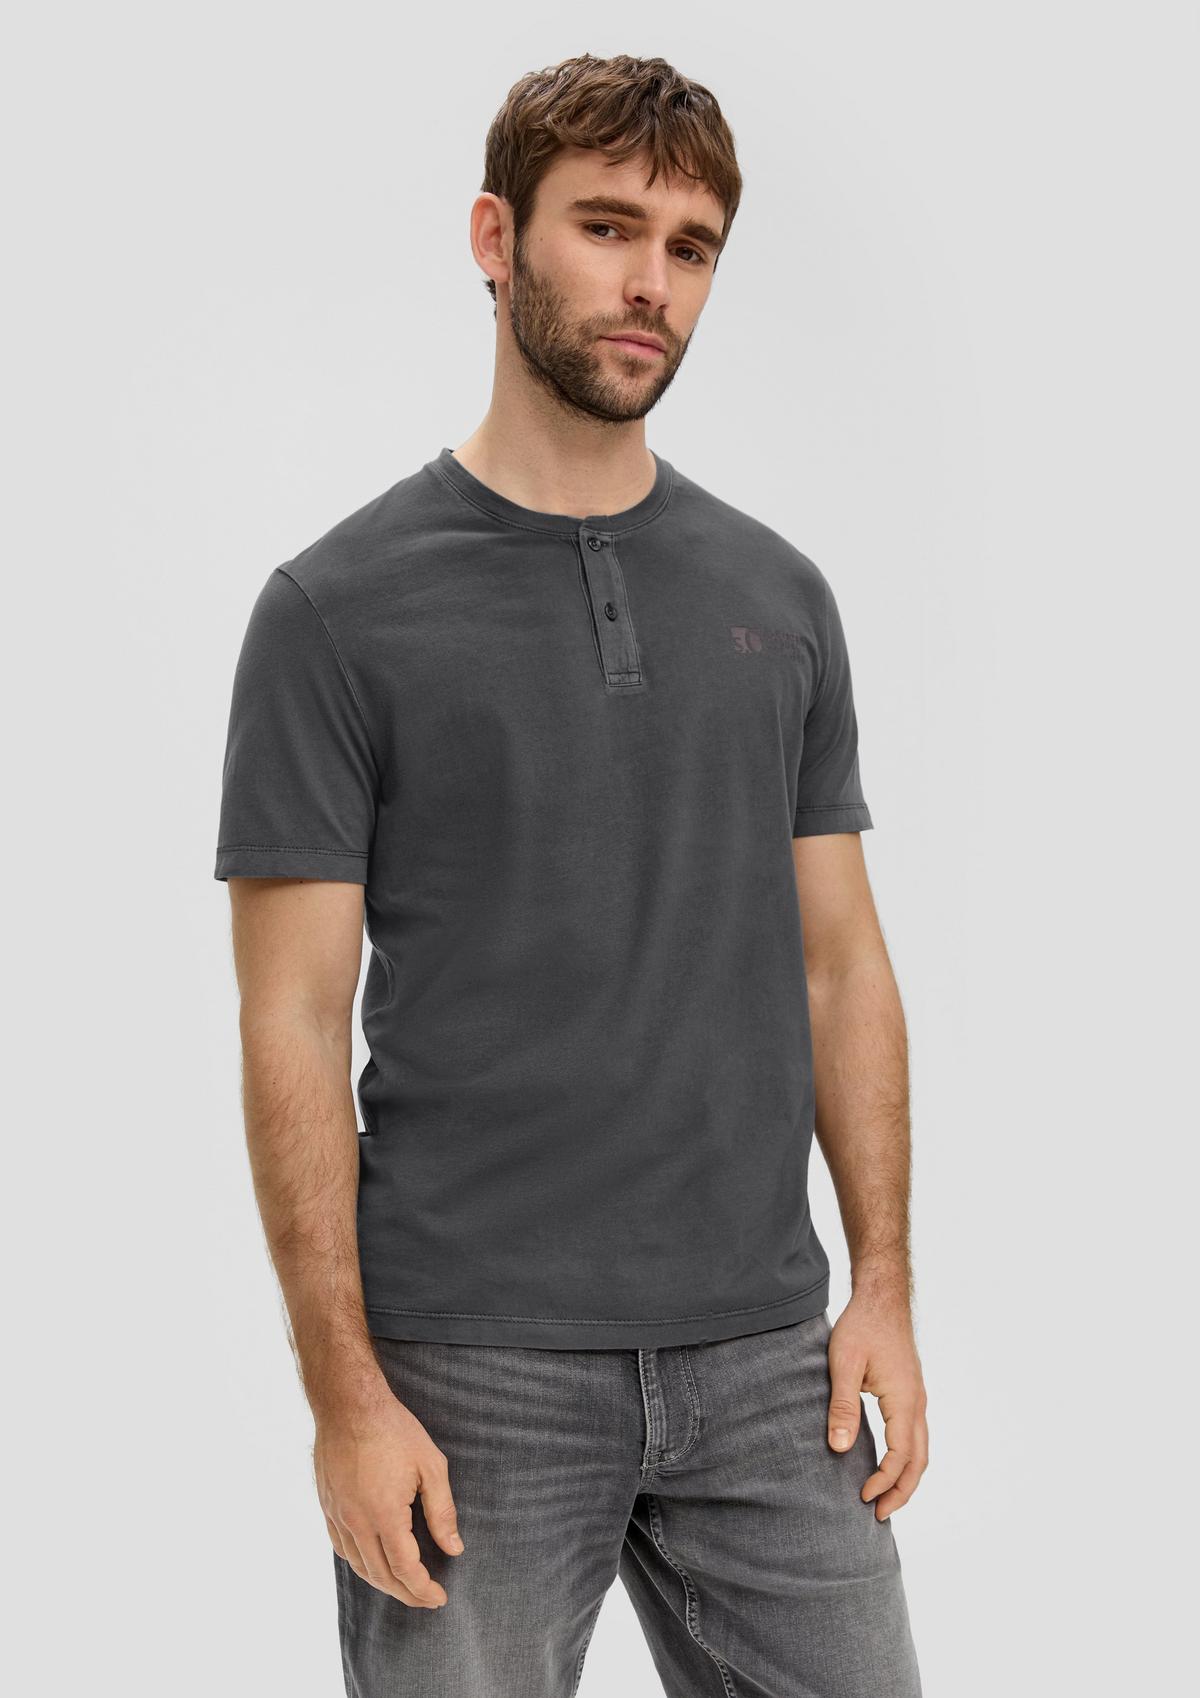 s.Oliver Garment-dyed T-shirt with a Henley neckline